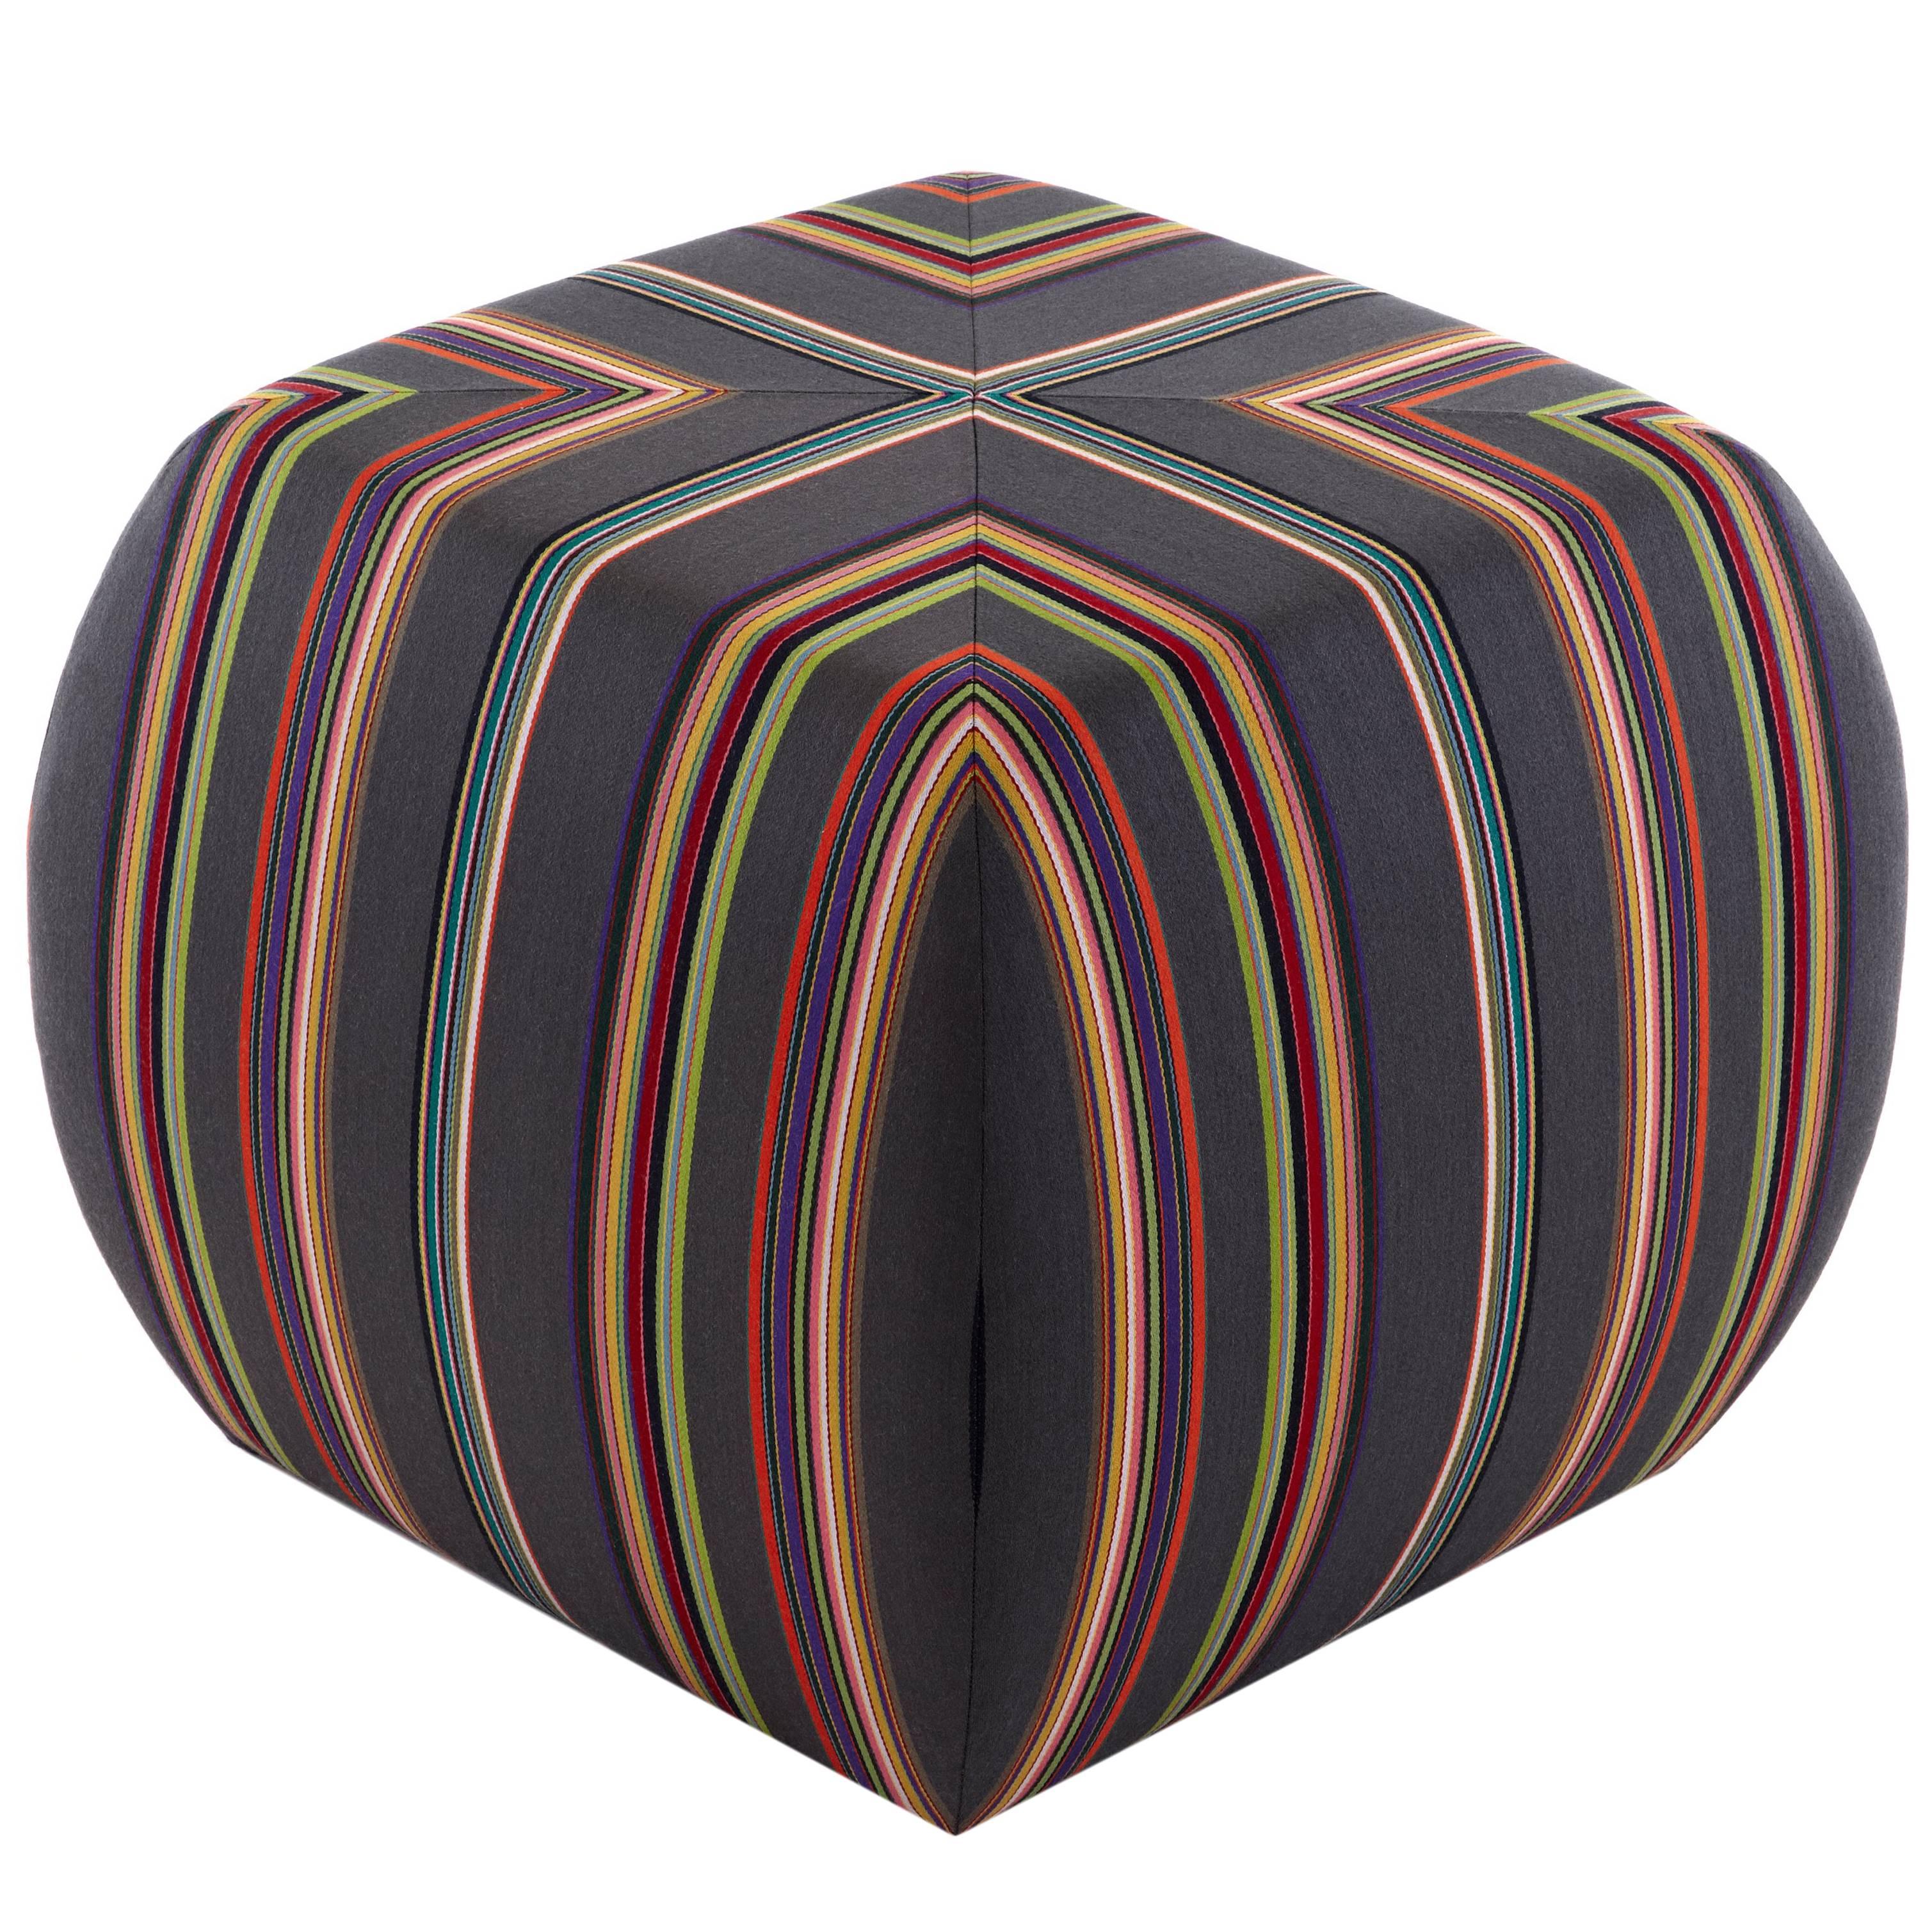 Glide Ottoman striped fabric, Round shapes, custom ottoman with casters movable  For Sale